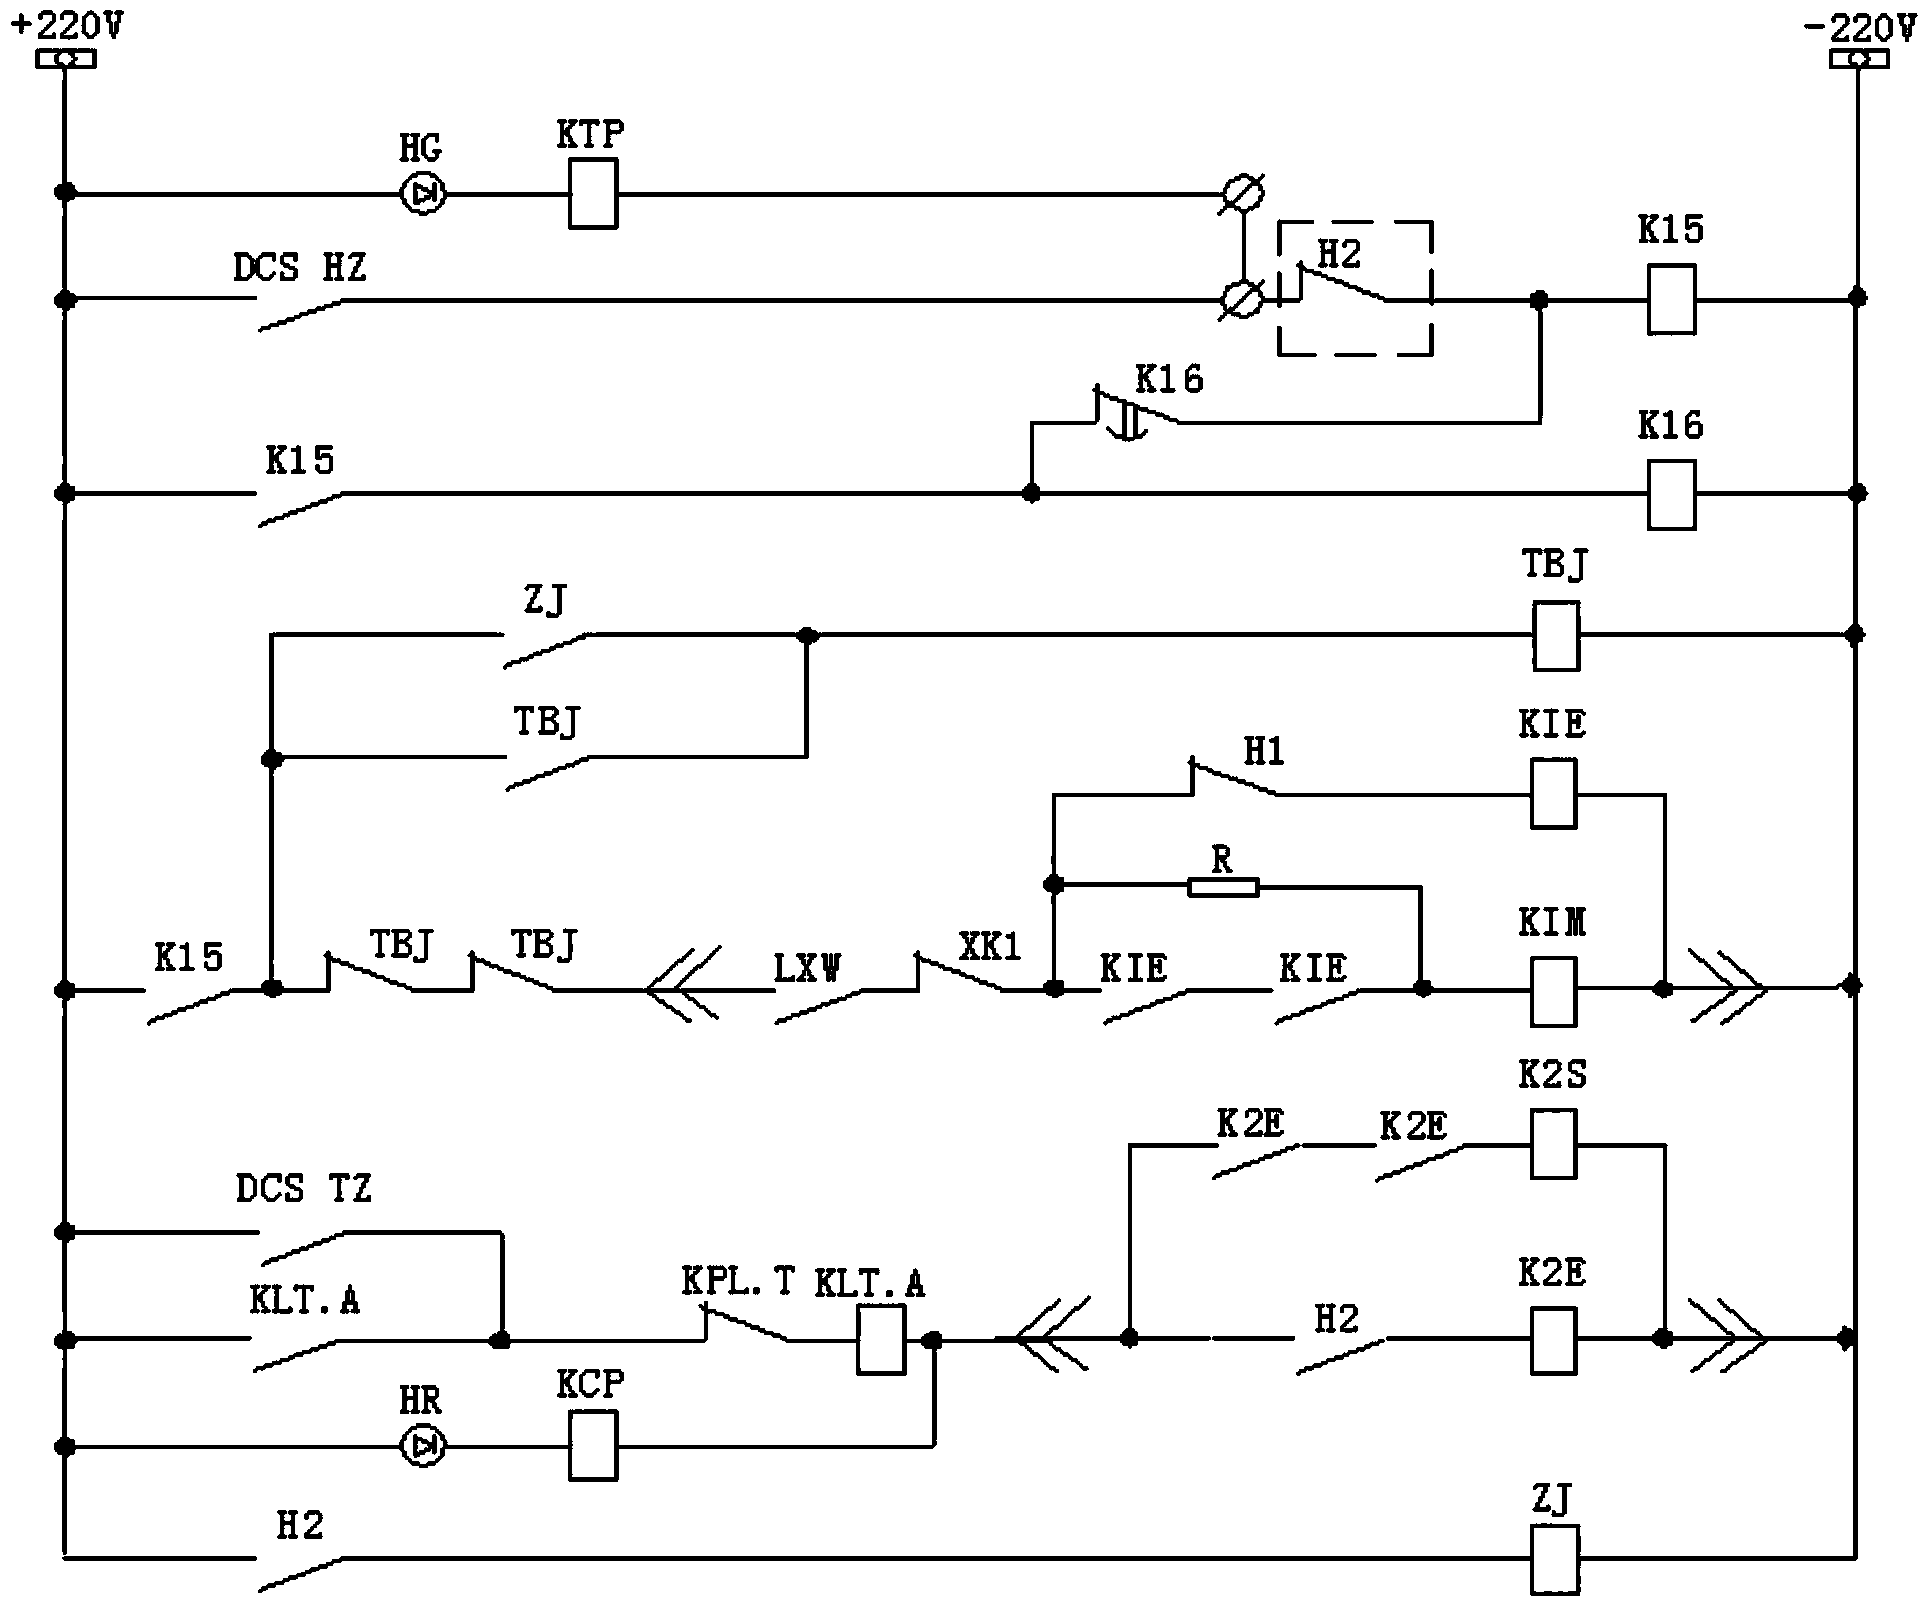 Improved FC switch control loop